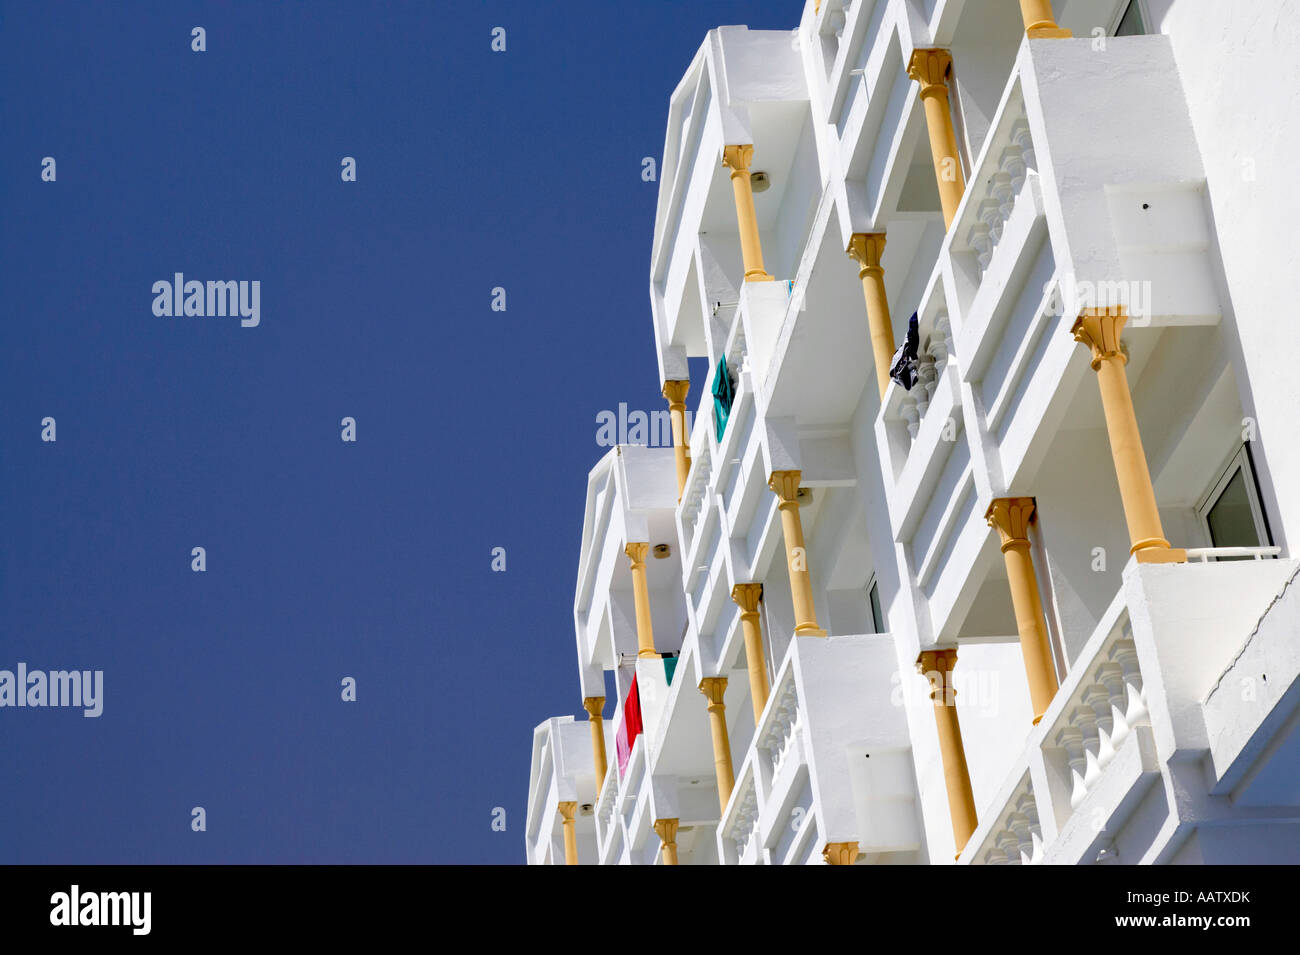 tourist hotel balconies with drying clothes against blue sky in hammamet tunisia Stock Photo